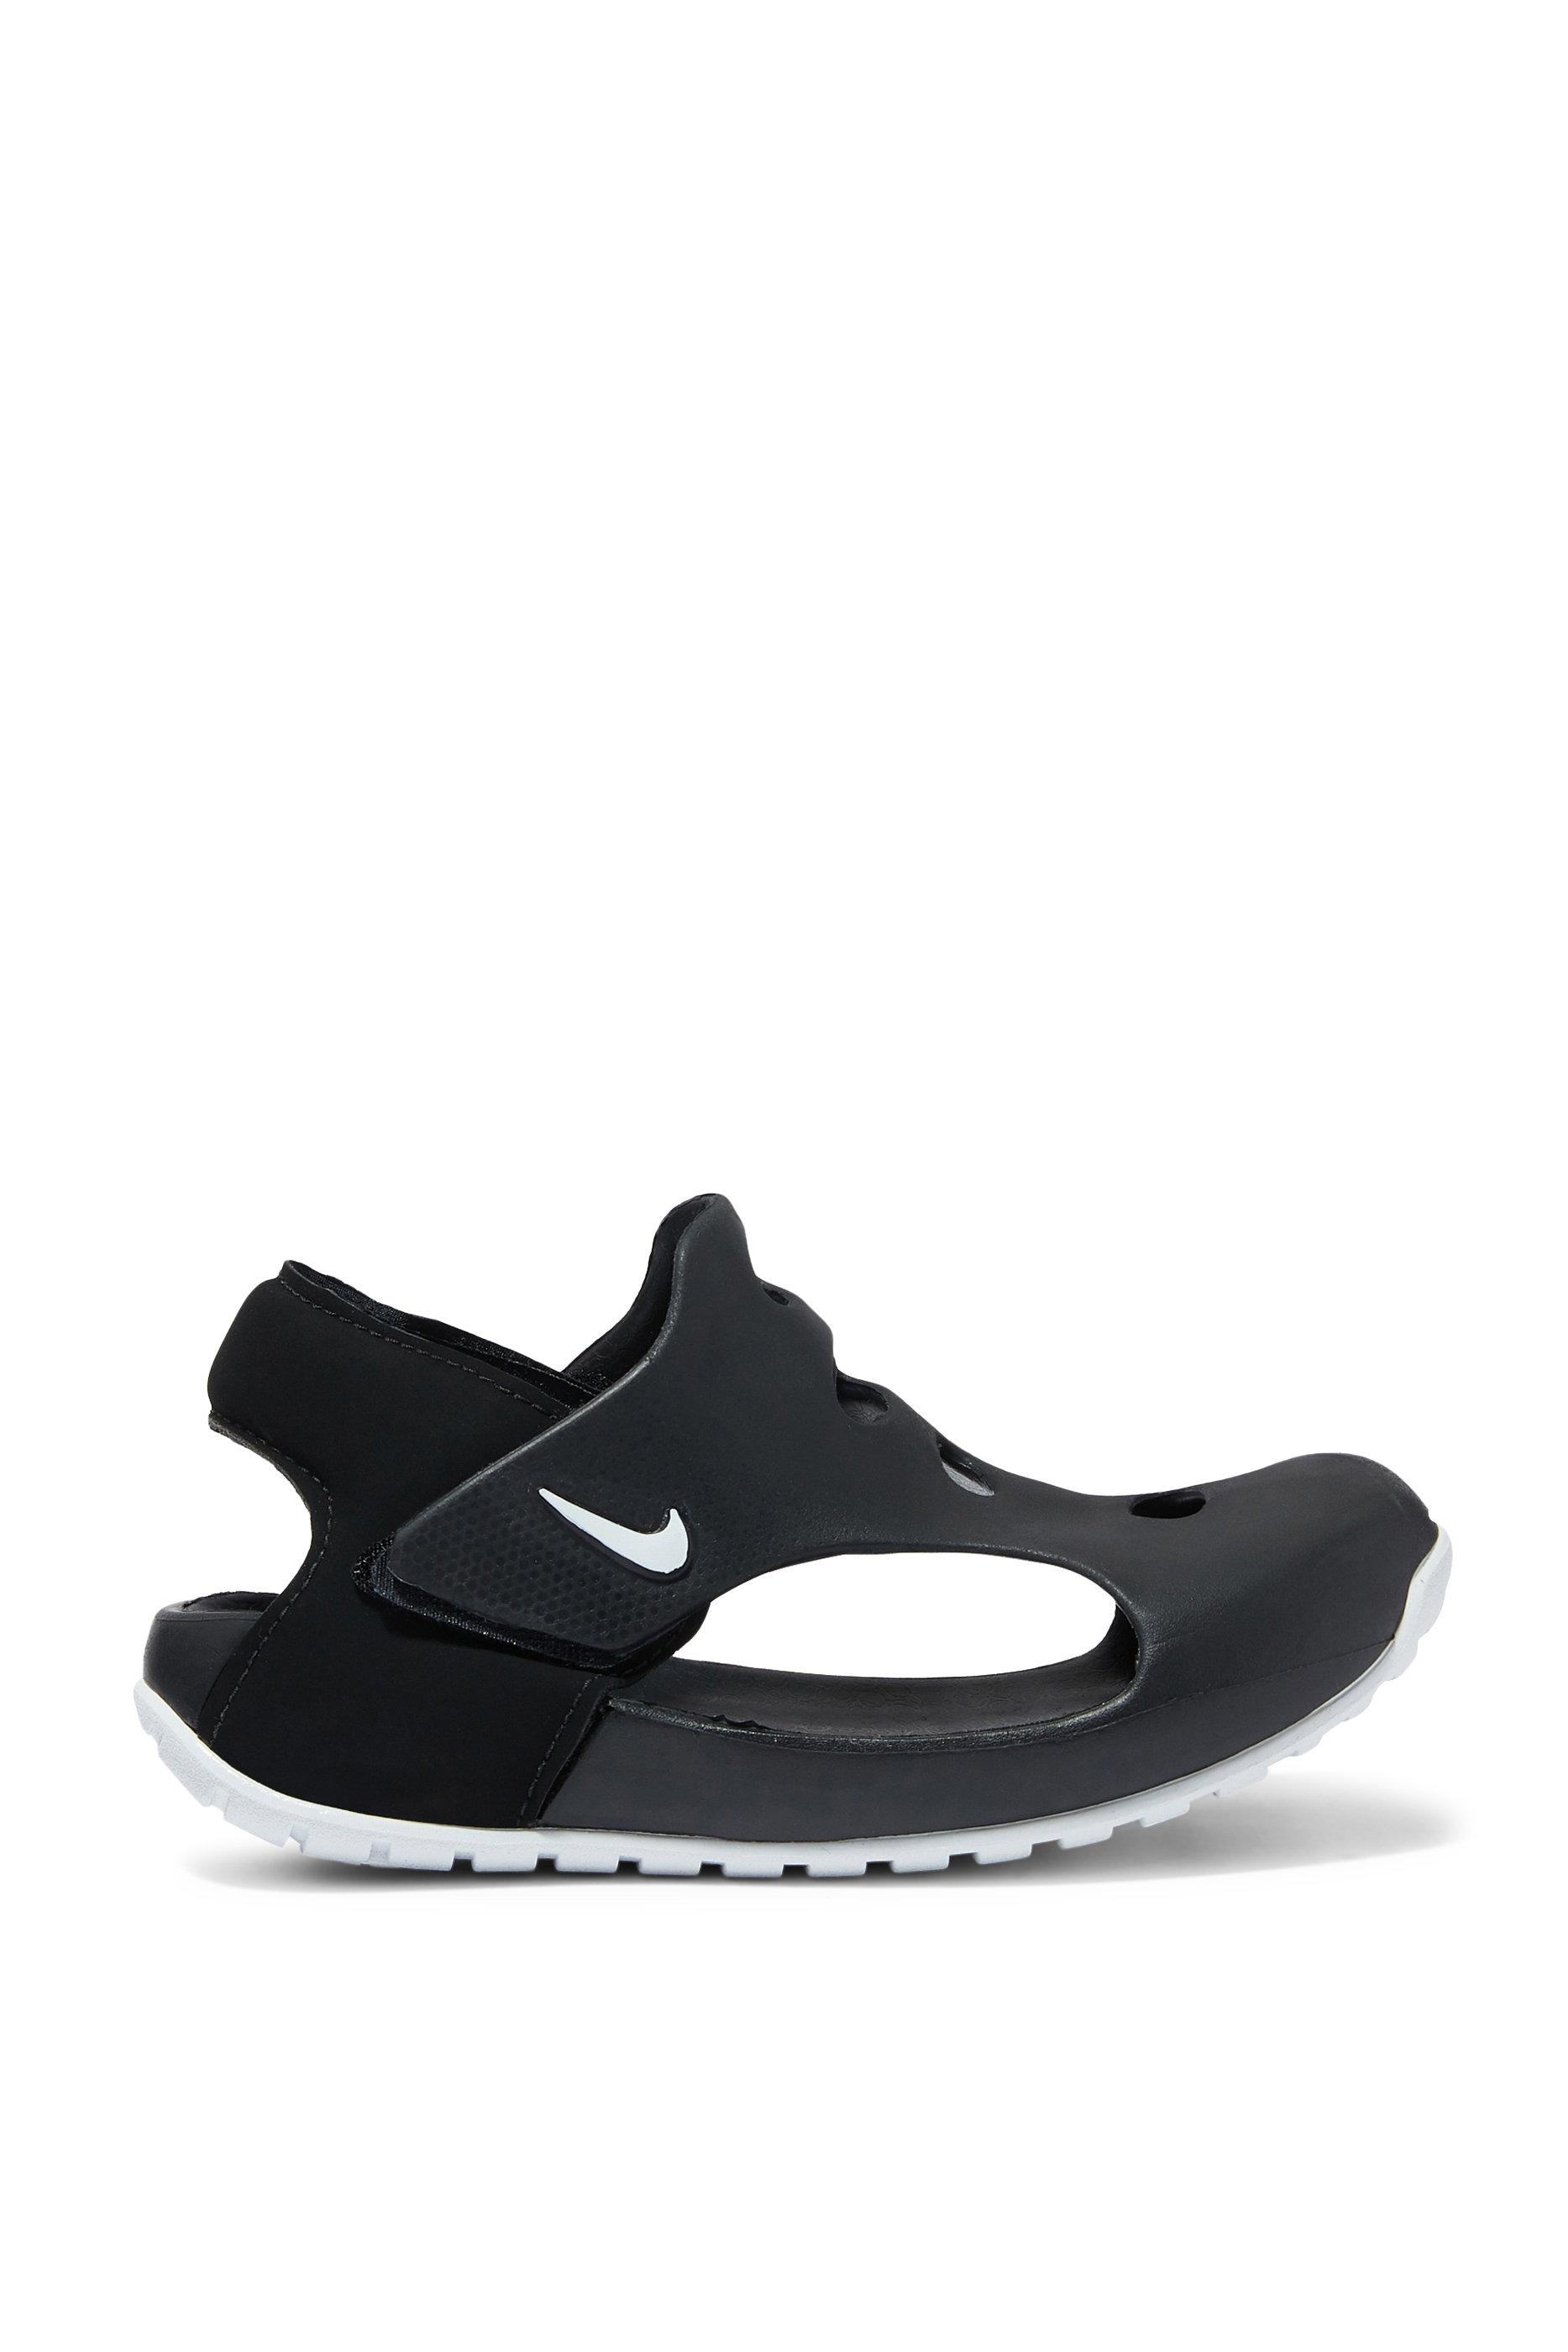 Buy Nike Sunray Protect 3 Sandals for Boy | Bloomingdale's Kuwait